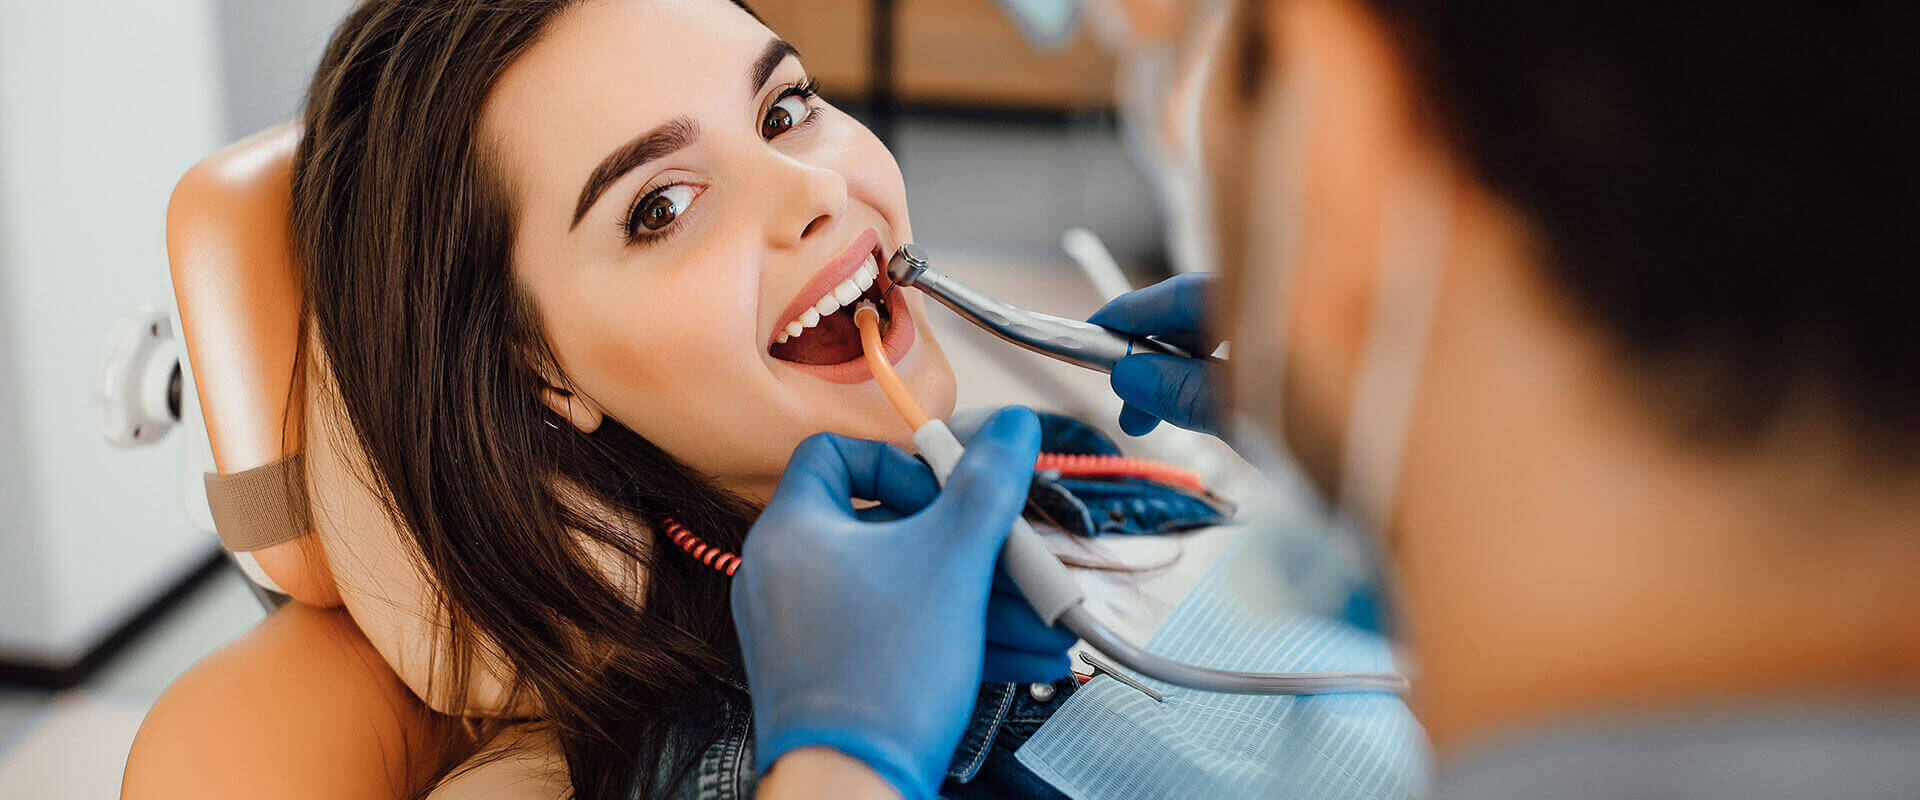 Our Dental Specialities Benefit All Patients in Boston and Seaport